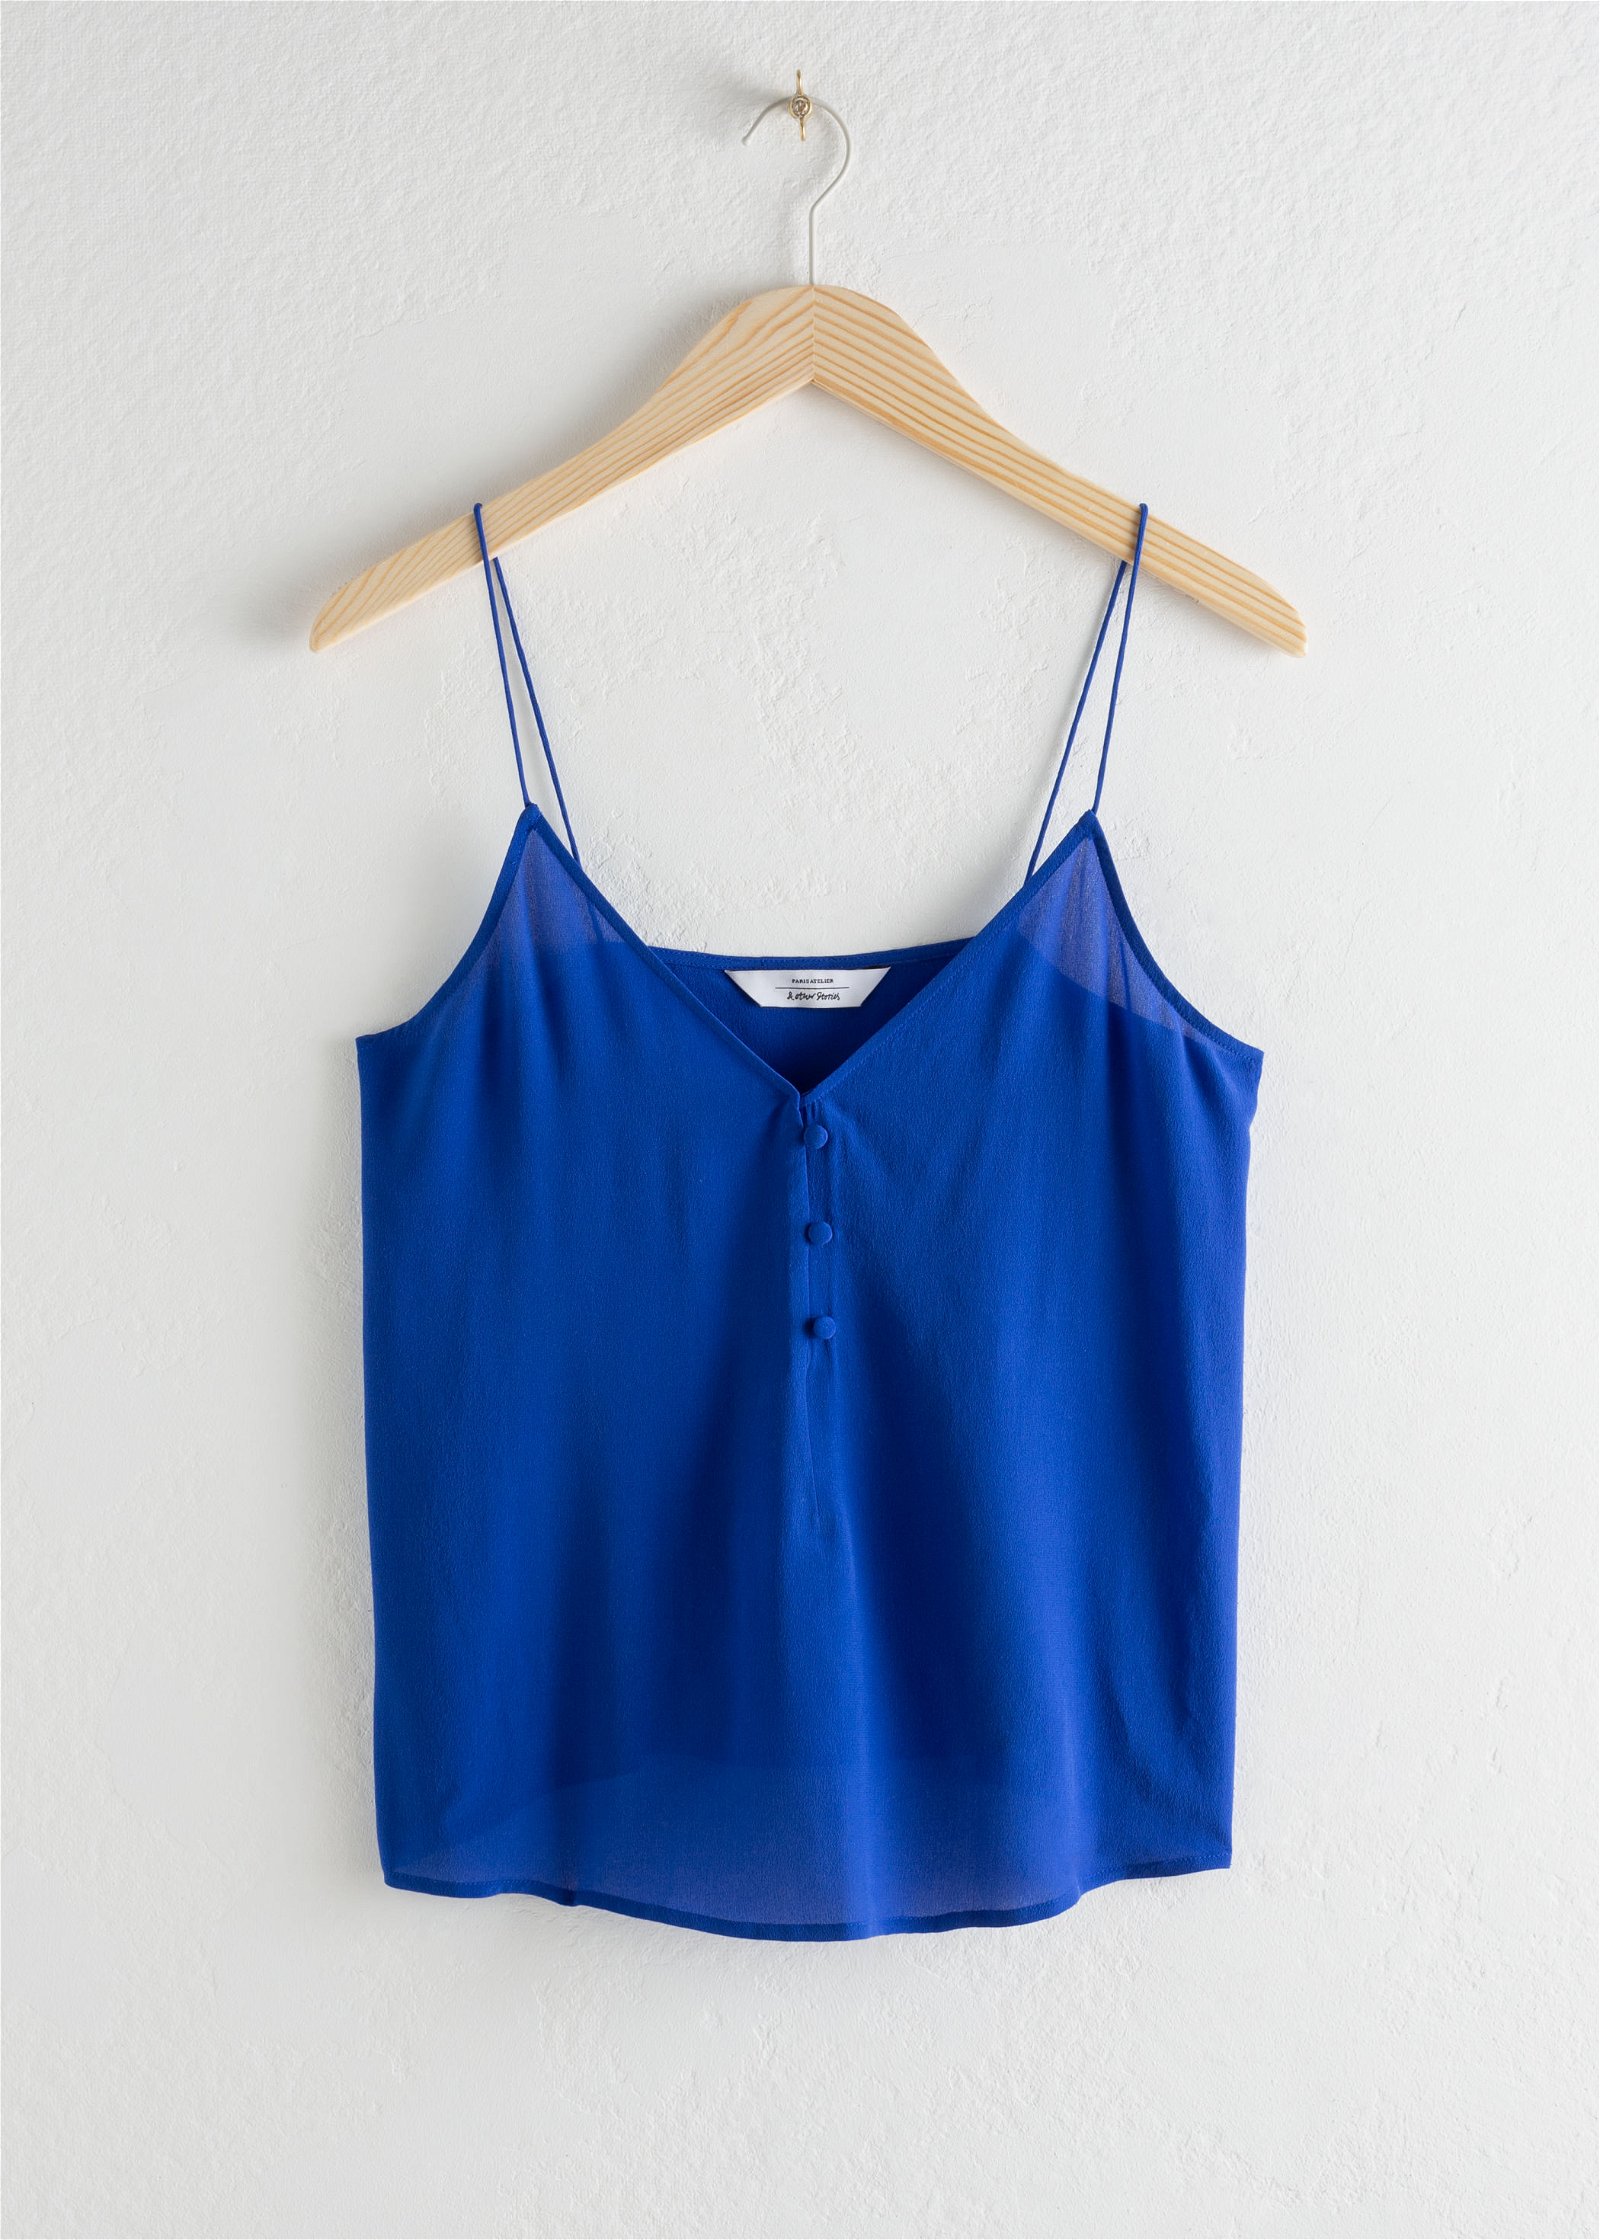 Free People Colette Camisole Top